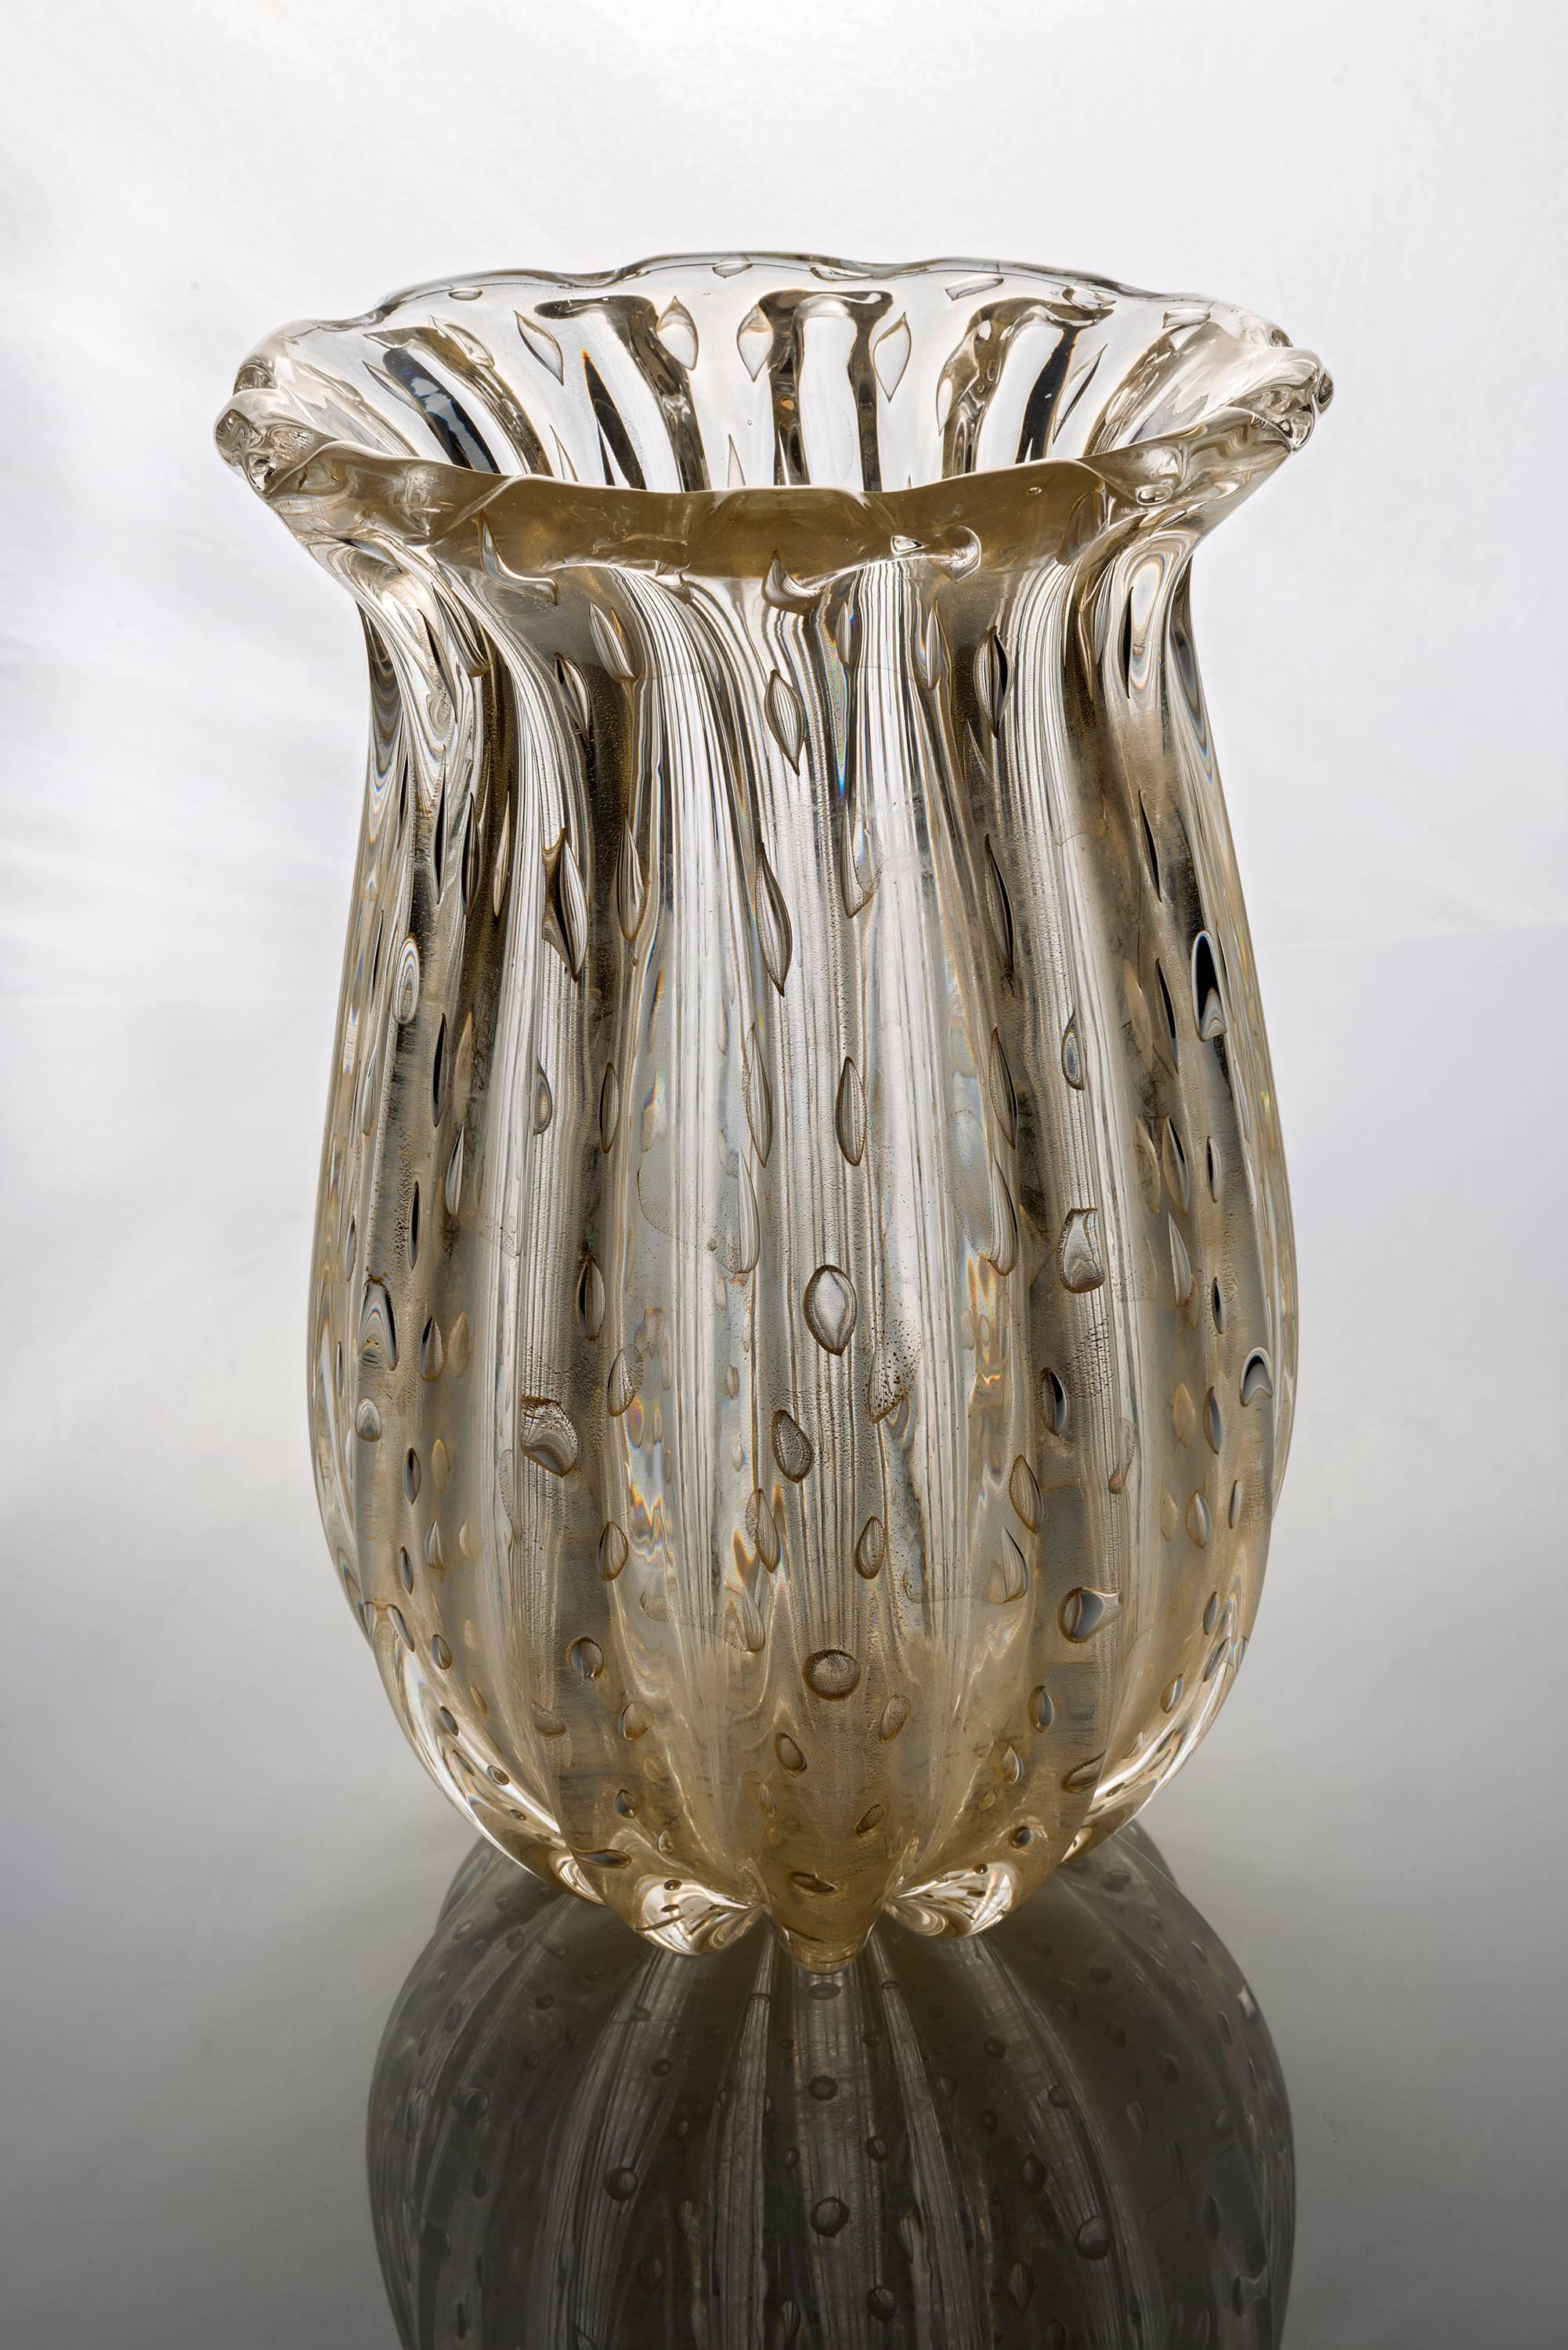 Superb 1950s Murano glass vase by F.lli Toso. 
Attractive handblown fluted body bearing controlled bullicante air bubble inclusions. Decorated with 24-karat gold. 
Signed 'Toso Murano' at the base. 
From a private collection.
 